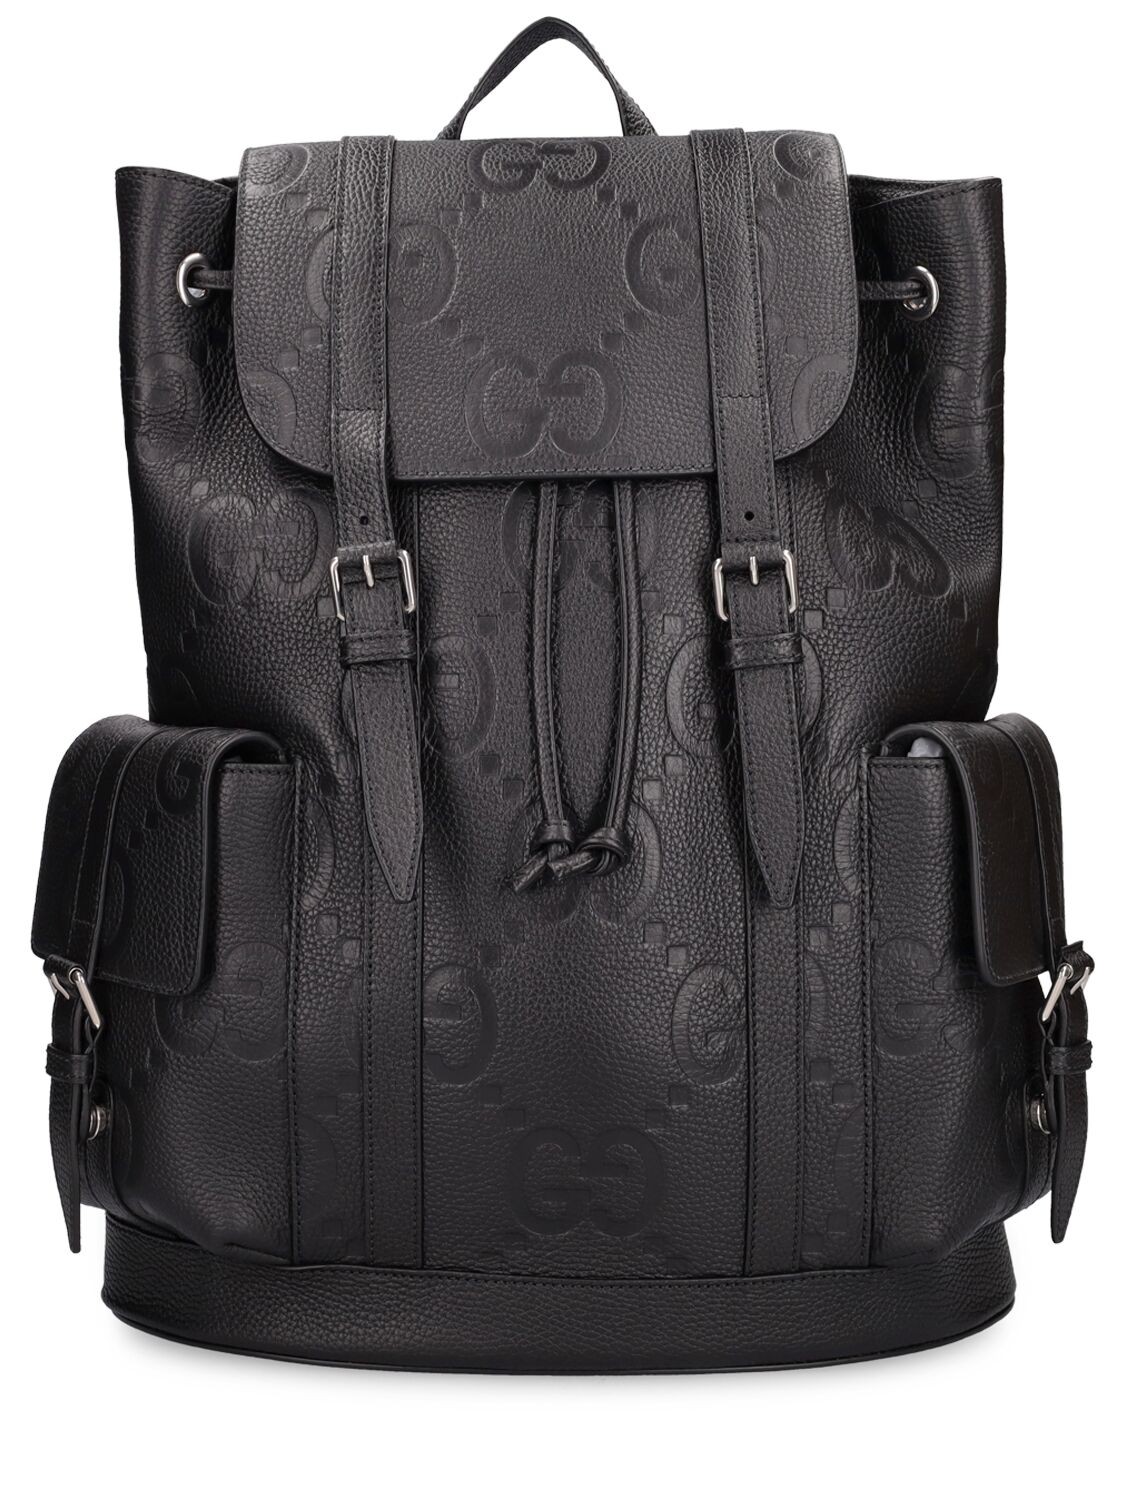 Jumbo GG small backpack in black leather